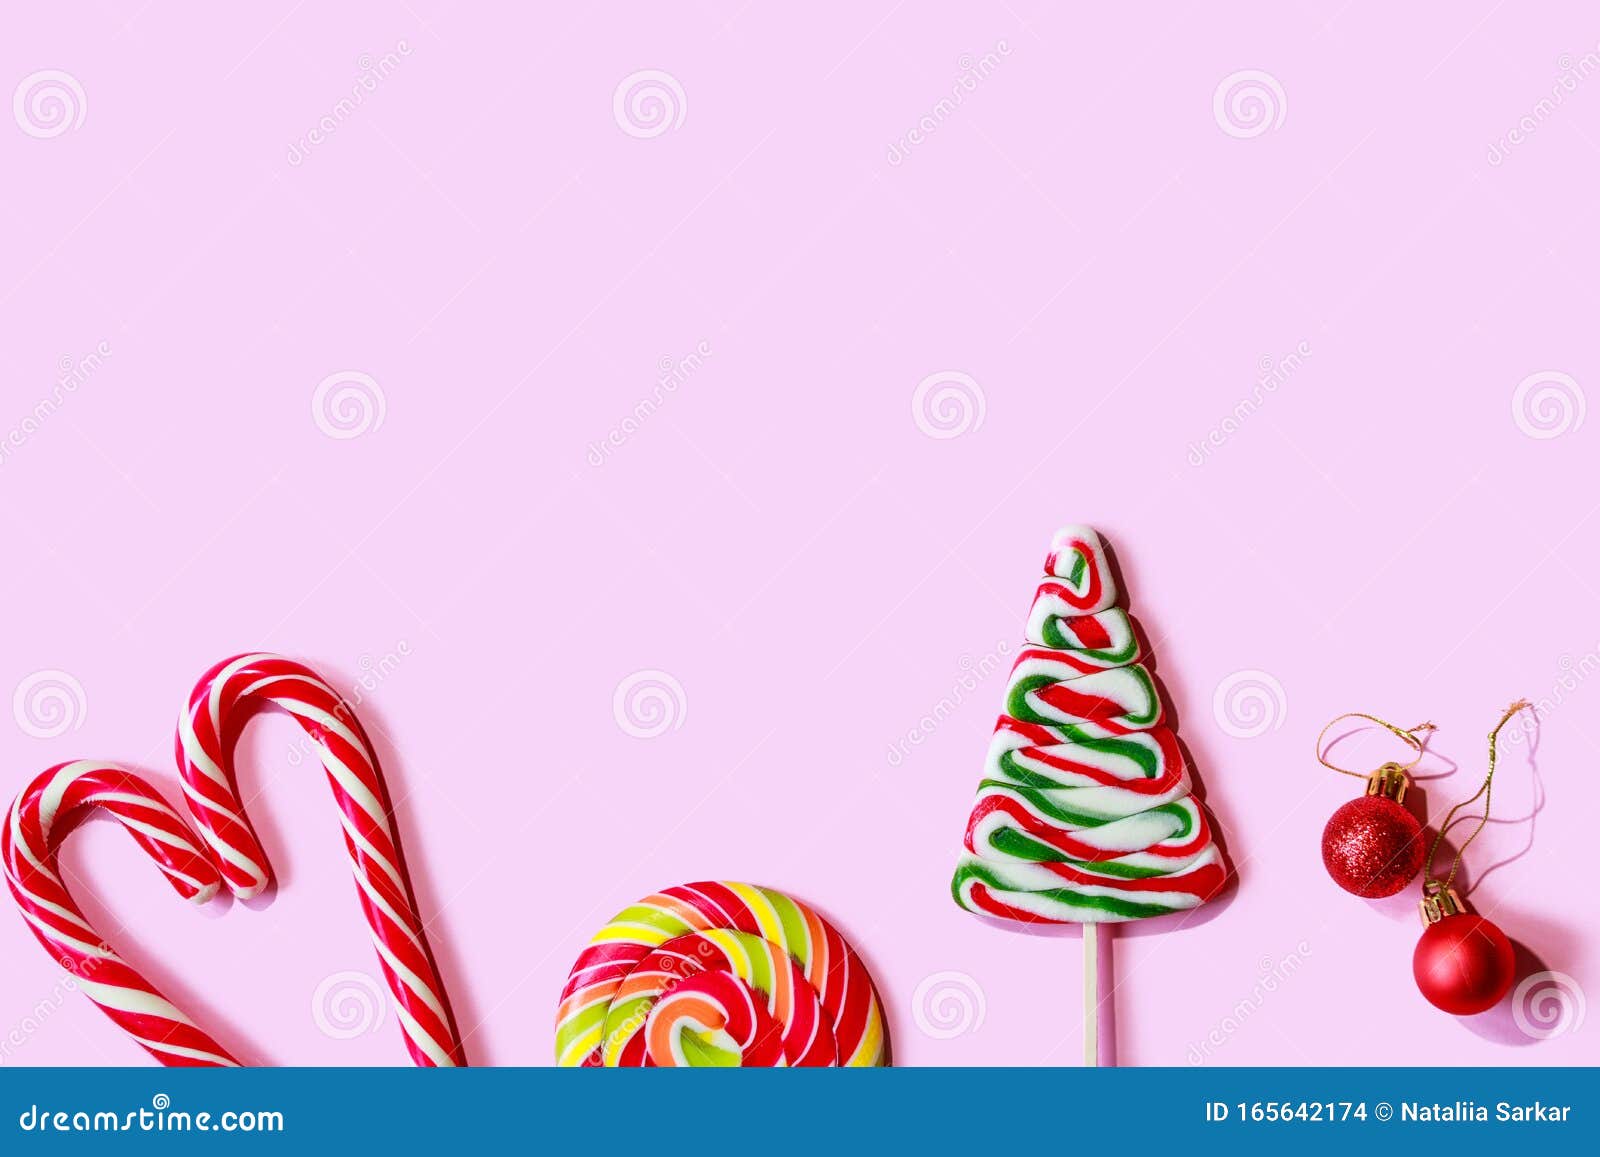 Christmas Candies And Sweets On A Pink Background Stock Photo Image Of Candy Life 165642174